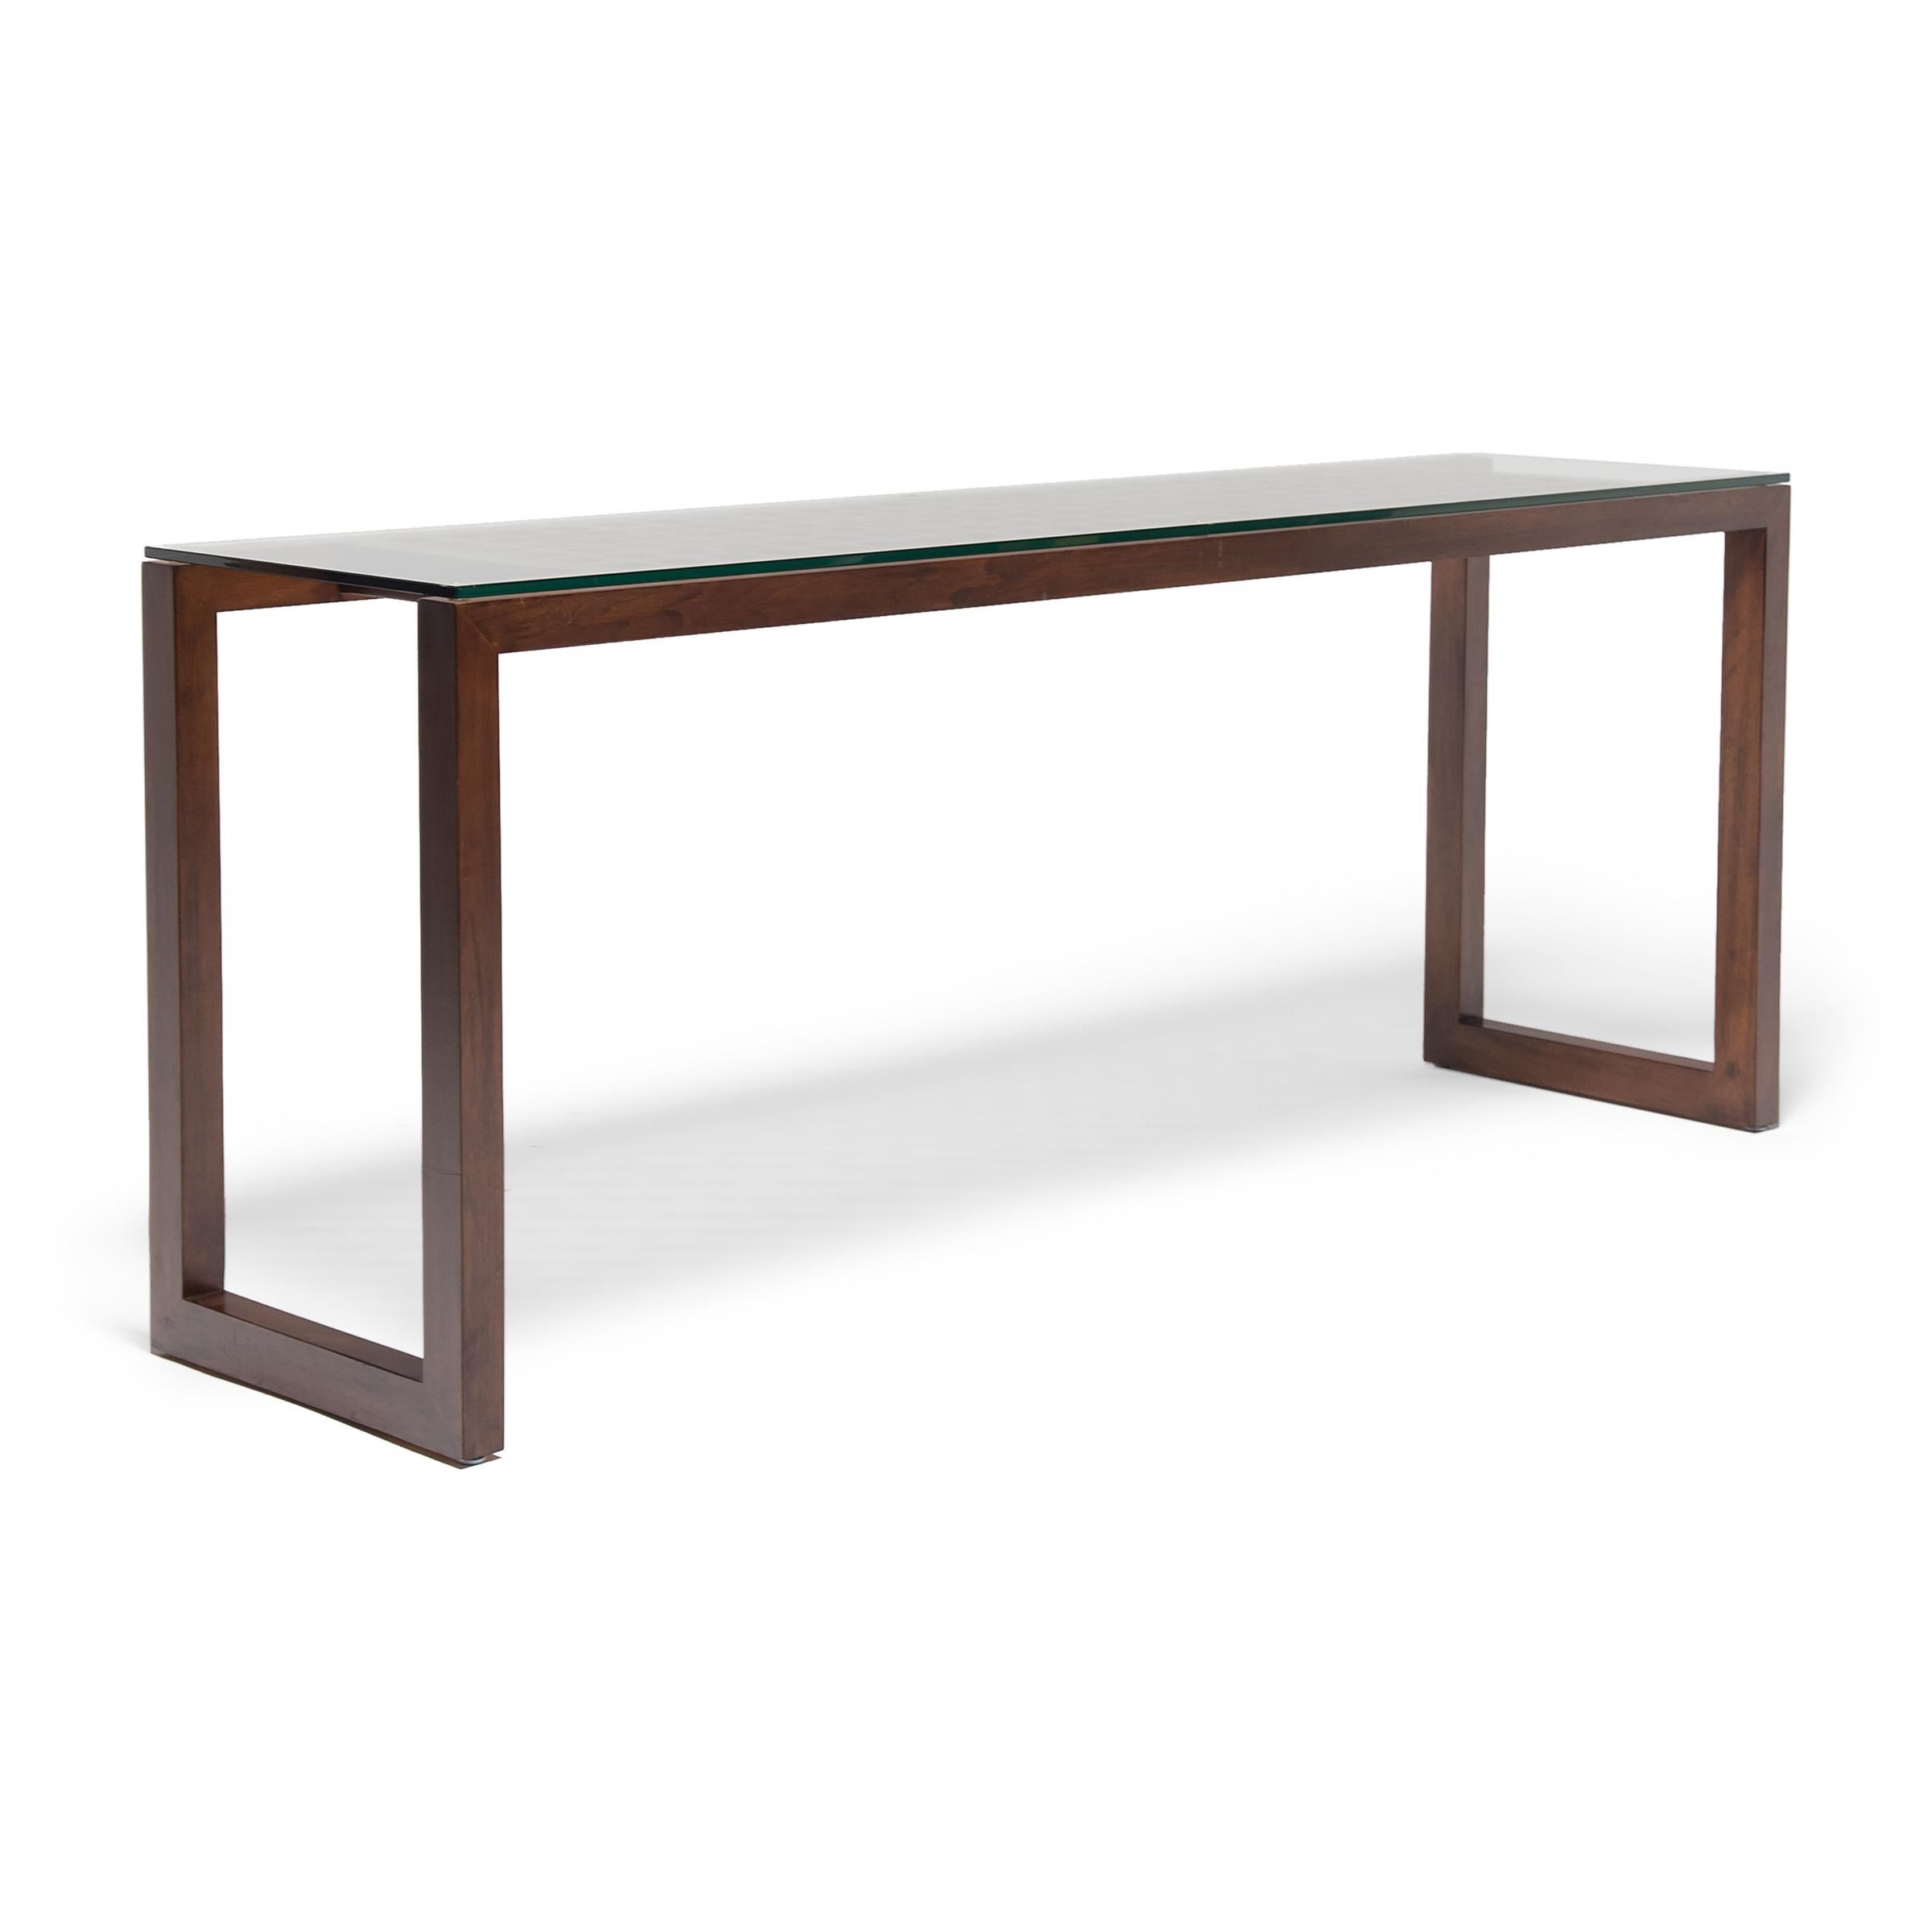 Chinese Lattice Top Waterfall Console Table 1